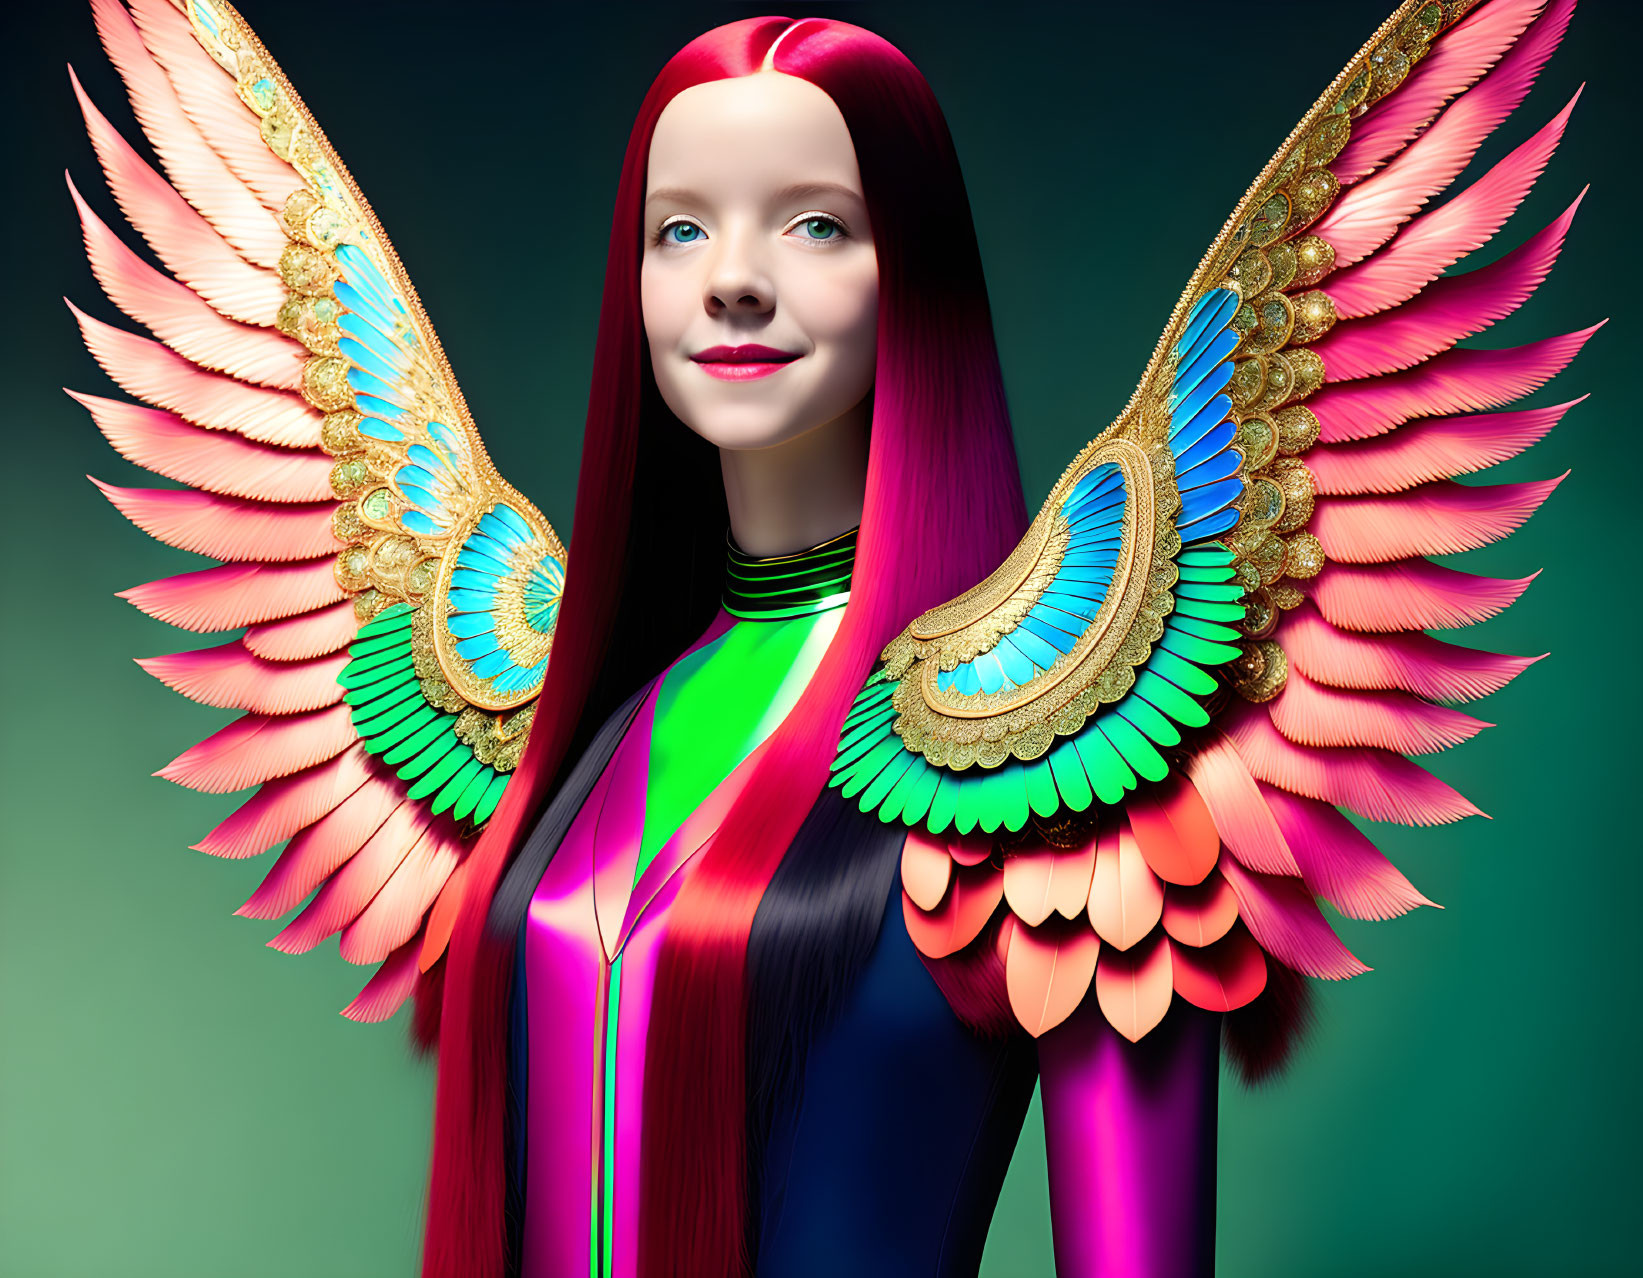 Multicolored Hair Girl with Bird-Like Wings on Green Background